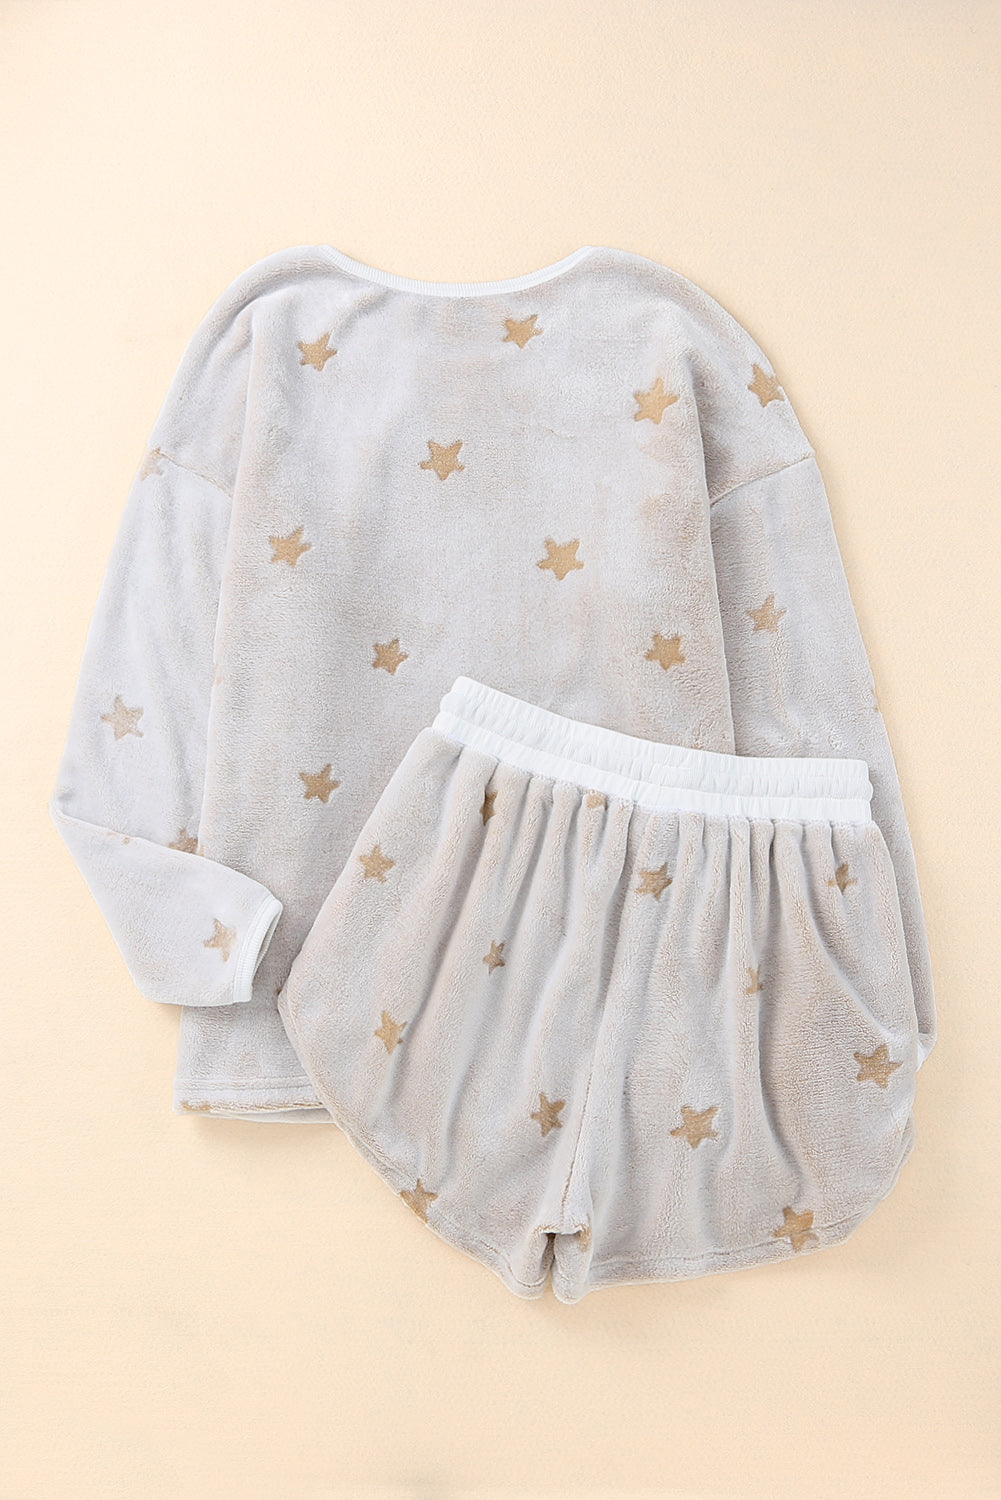 White Plush Star Pattern Long Sleeve Pullover and Shorts Lounge Set MSJ0046